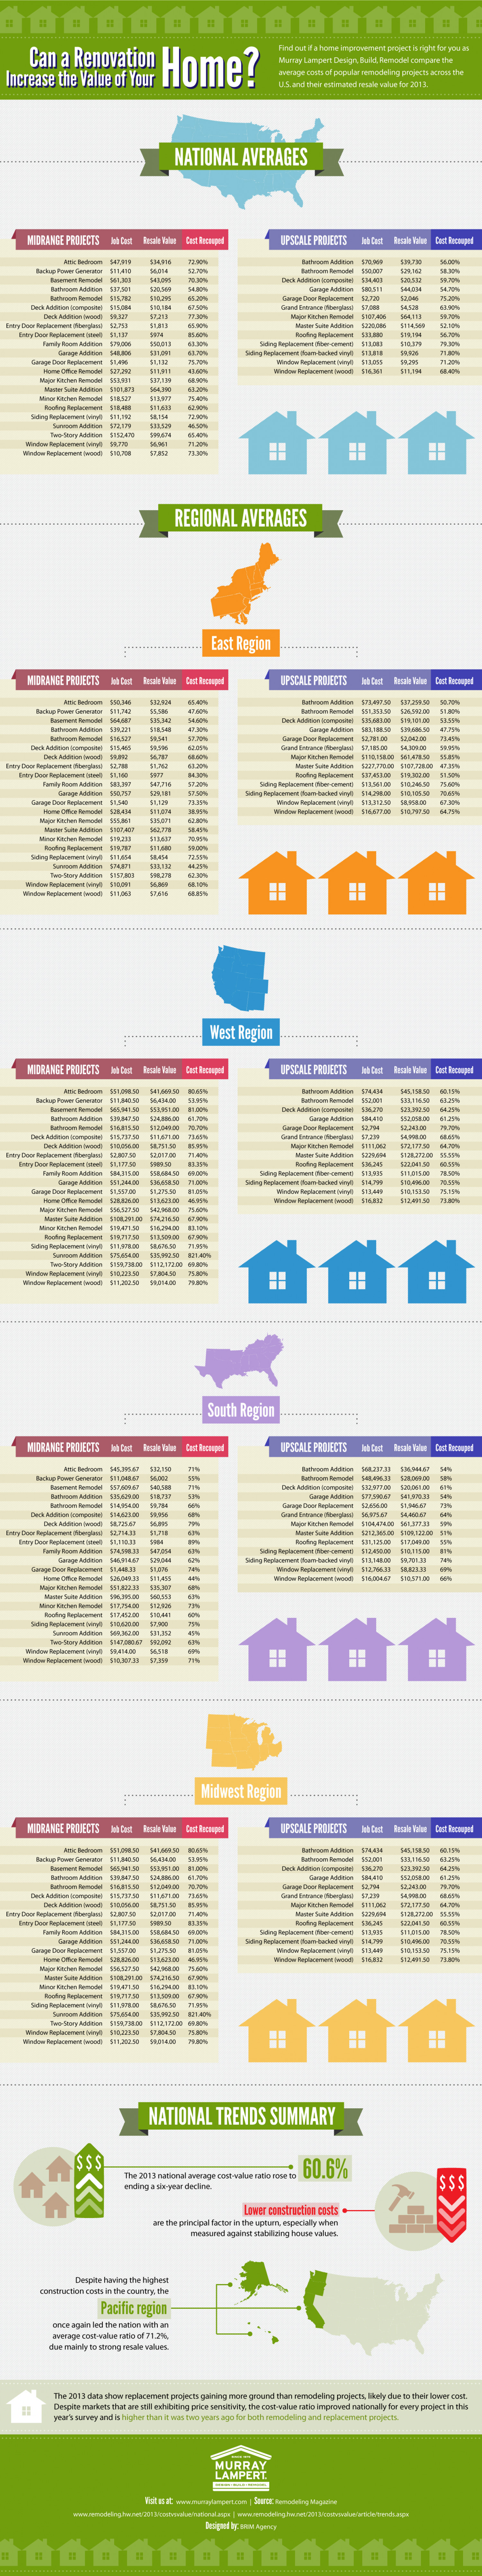 The Value of Home Remodeling Infographic